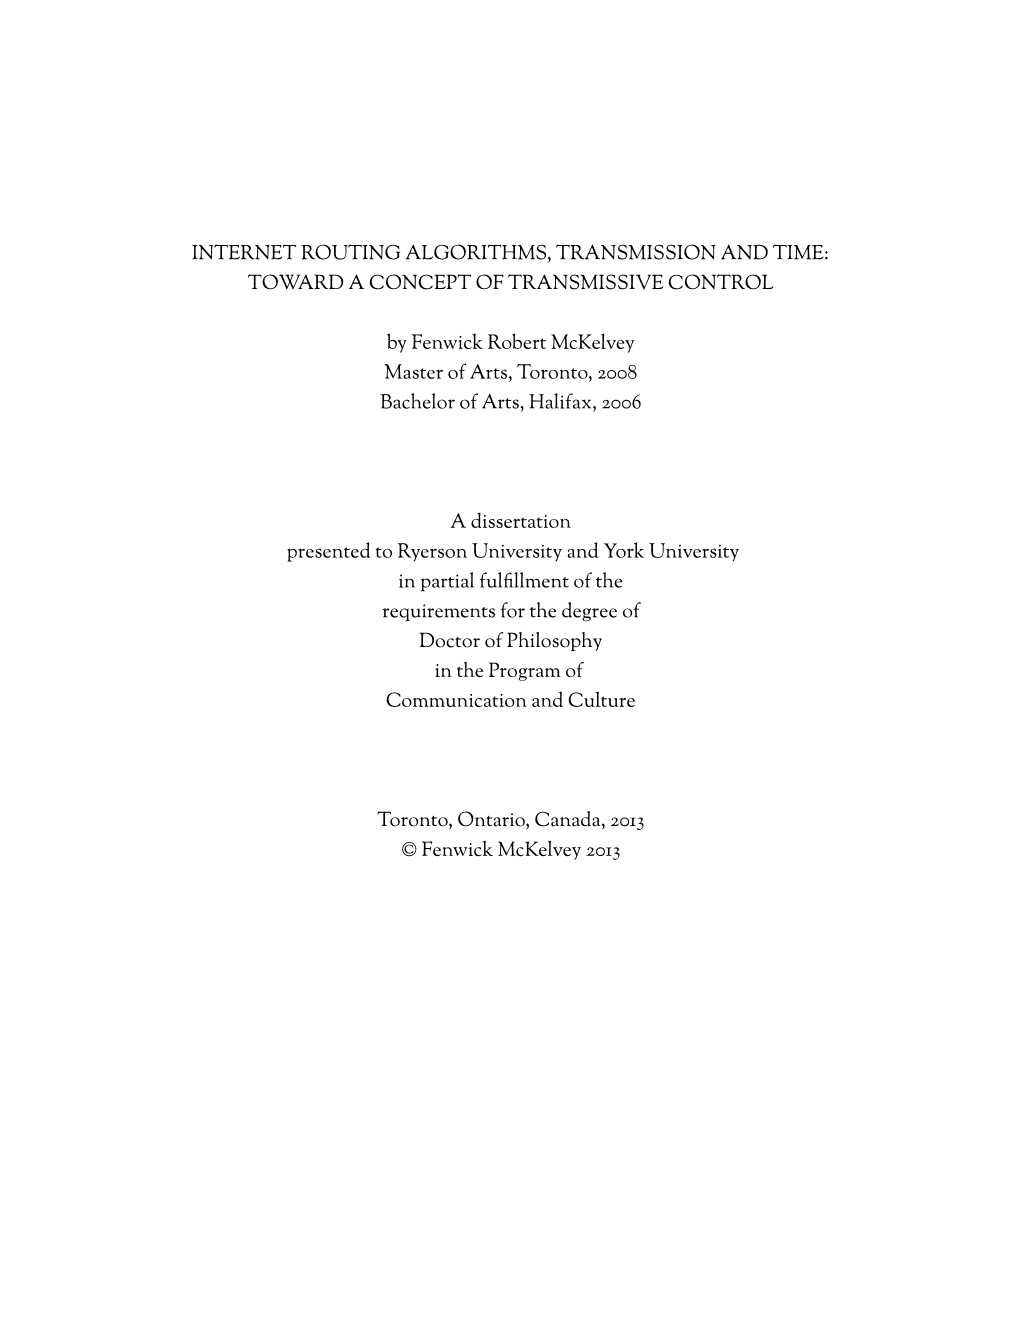 Internet Routing Algorithms, Transmission and Time: Toward a Concept of Transmissive Control